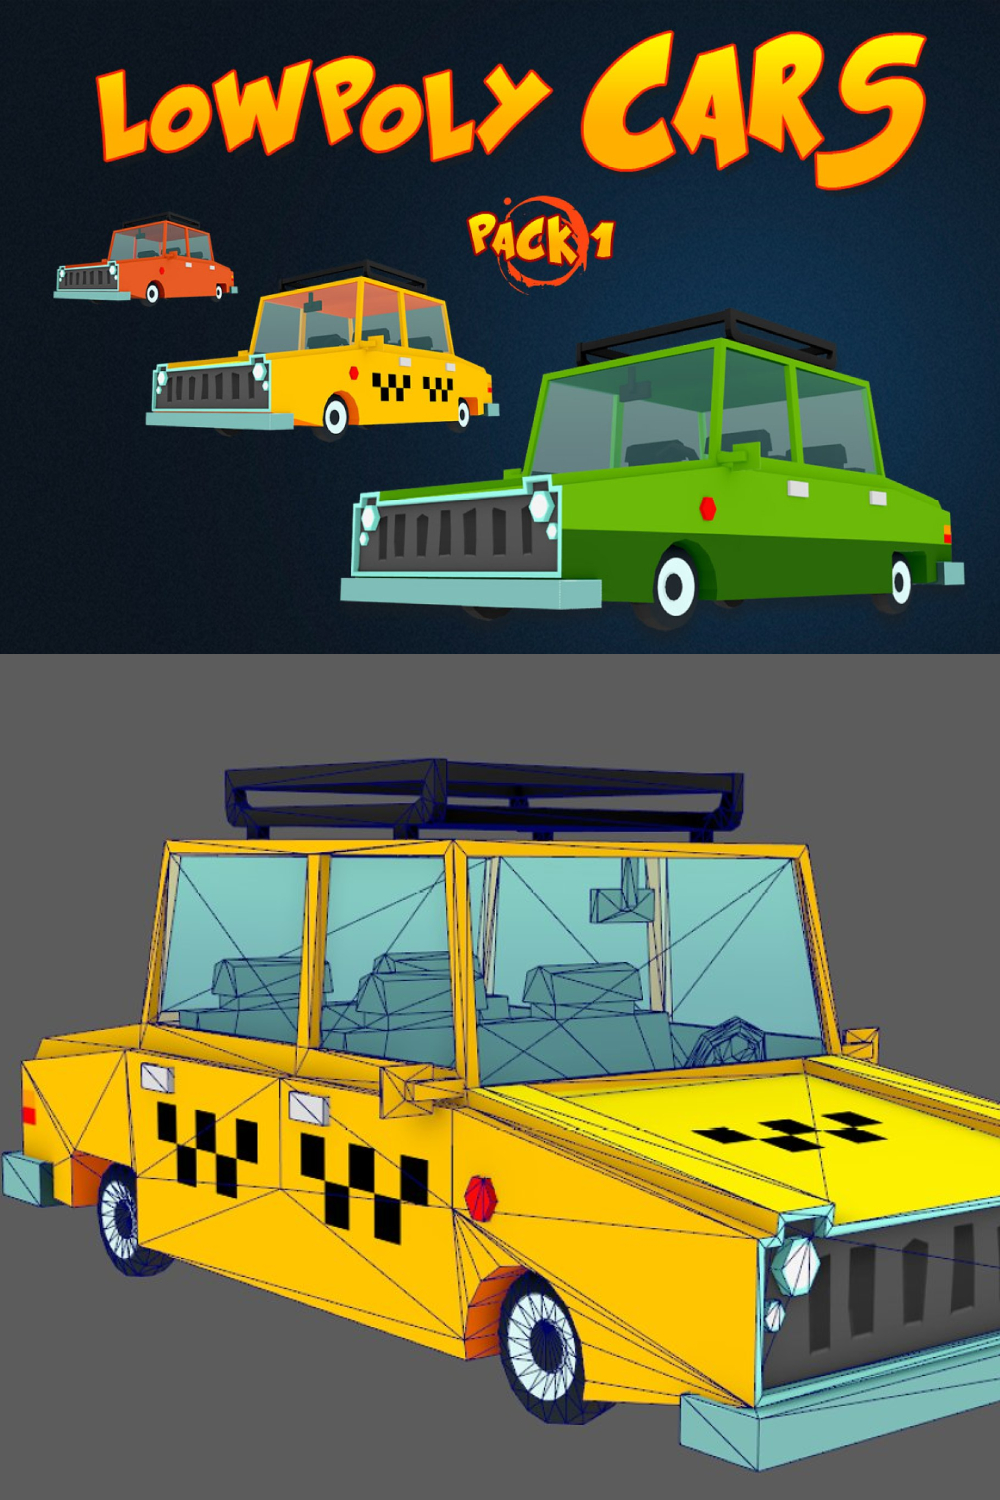 Low Poly Cars Pack 1 - Pinterest.